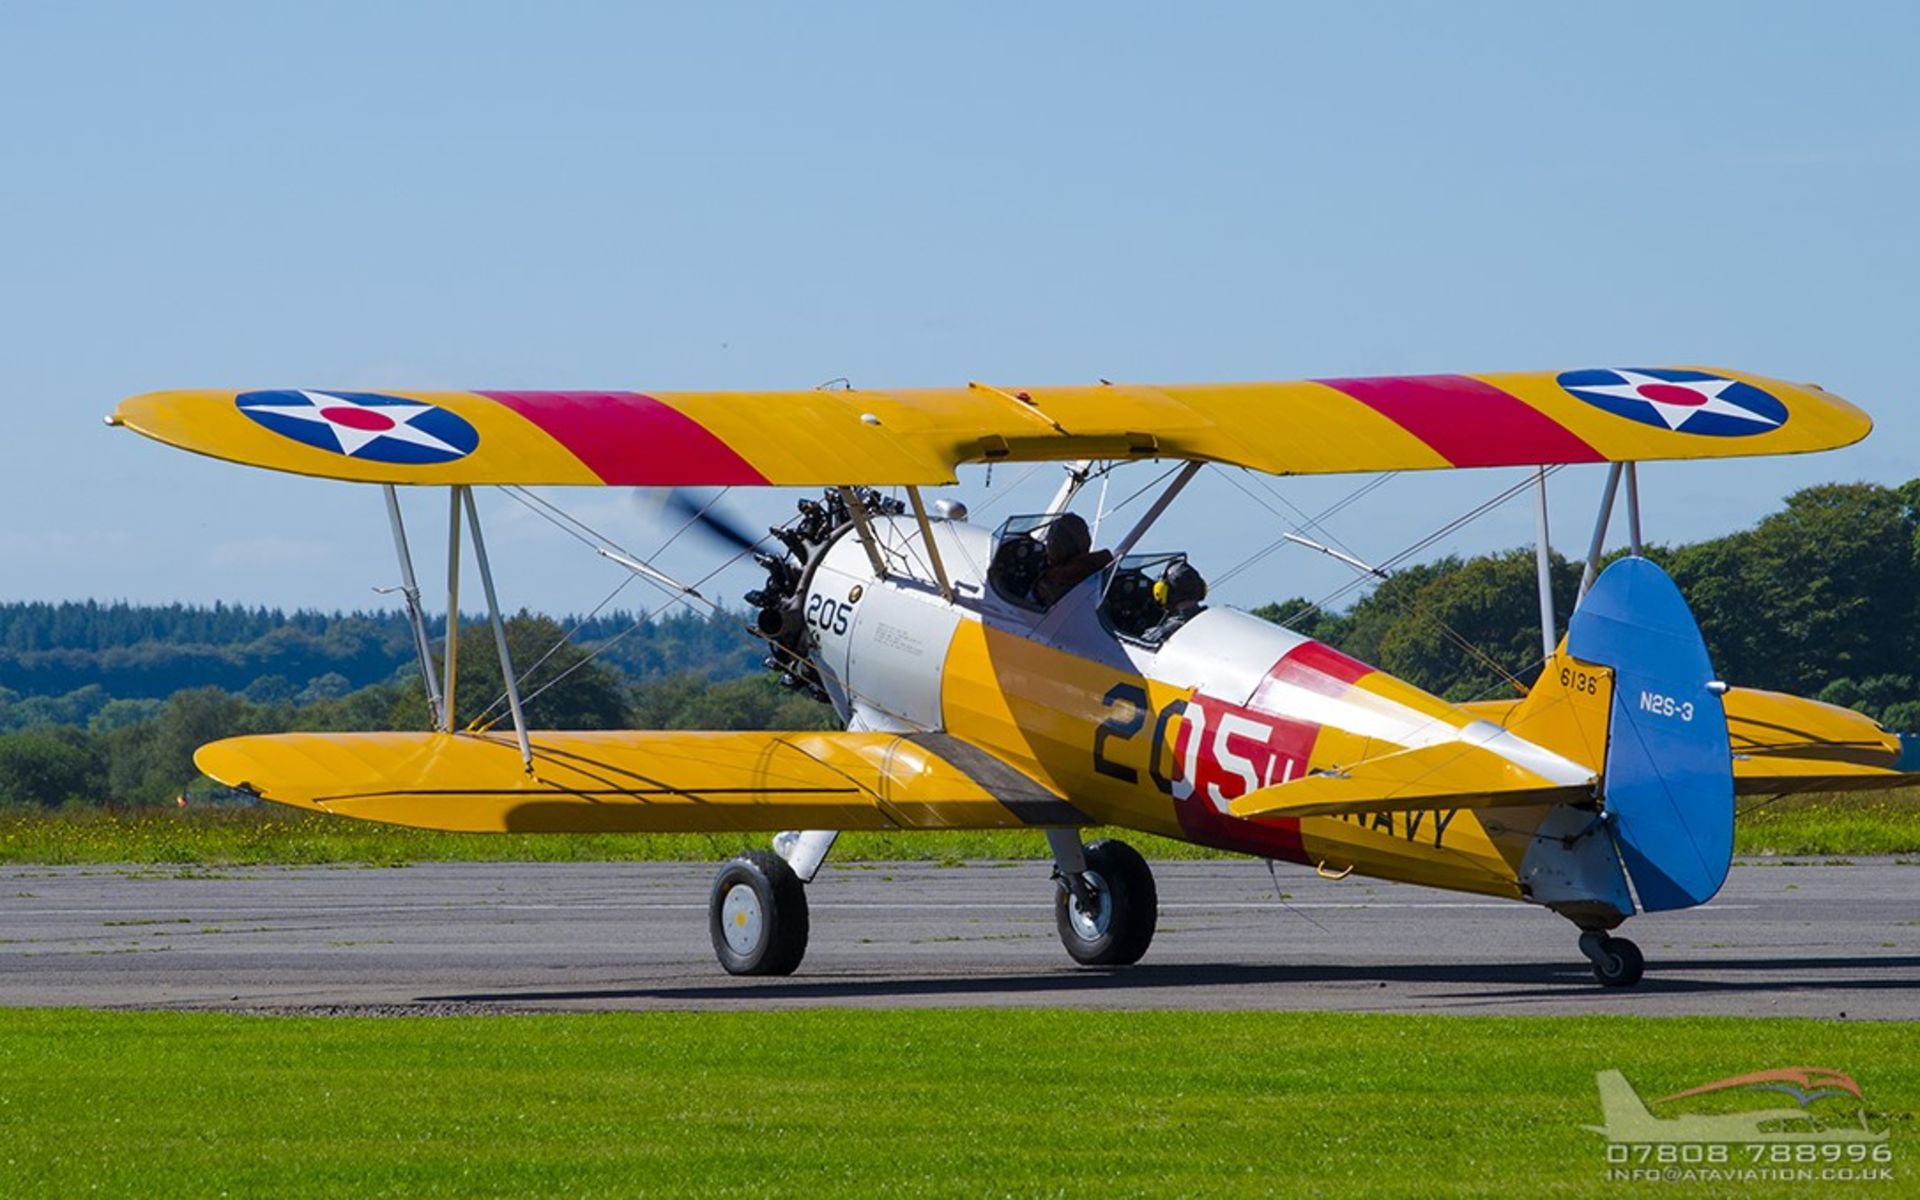 This Beautiful Boeing Stearman was Built 1942 and is painted in US Navy coloursa truly lovely